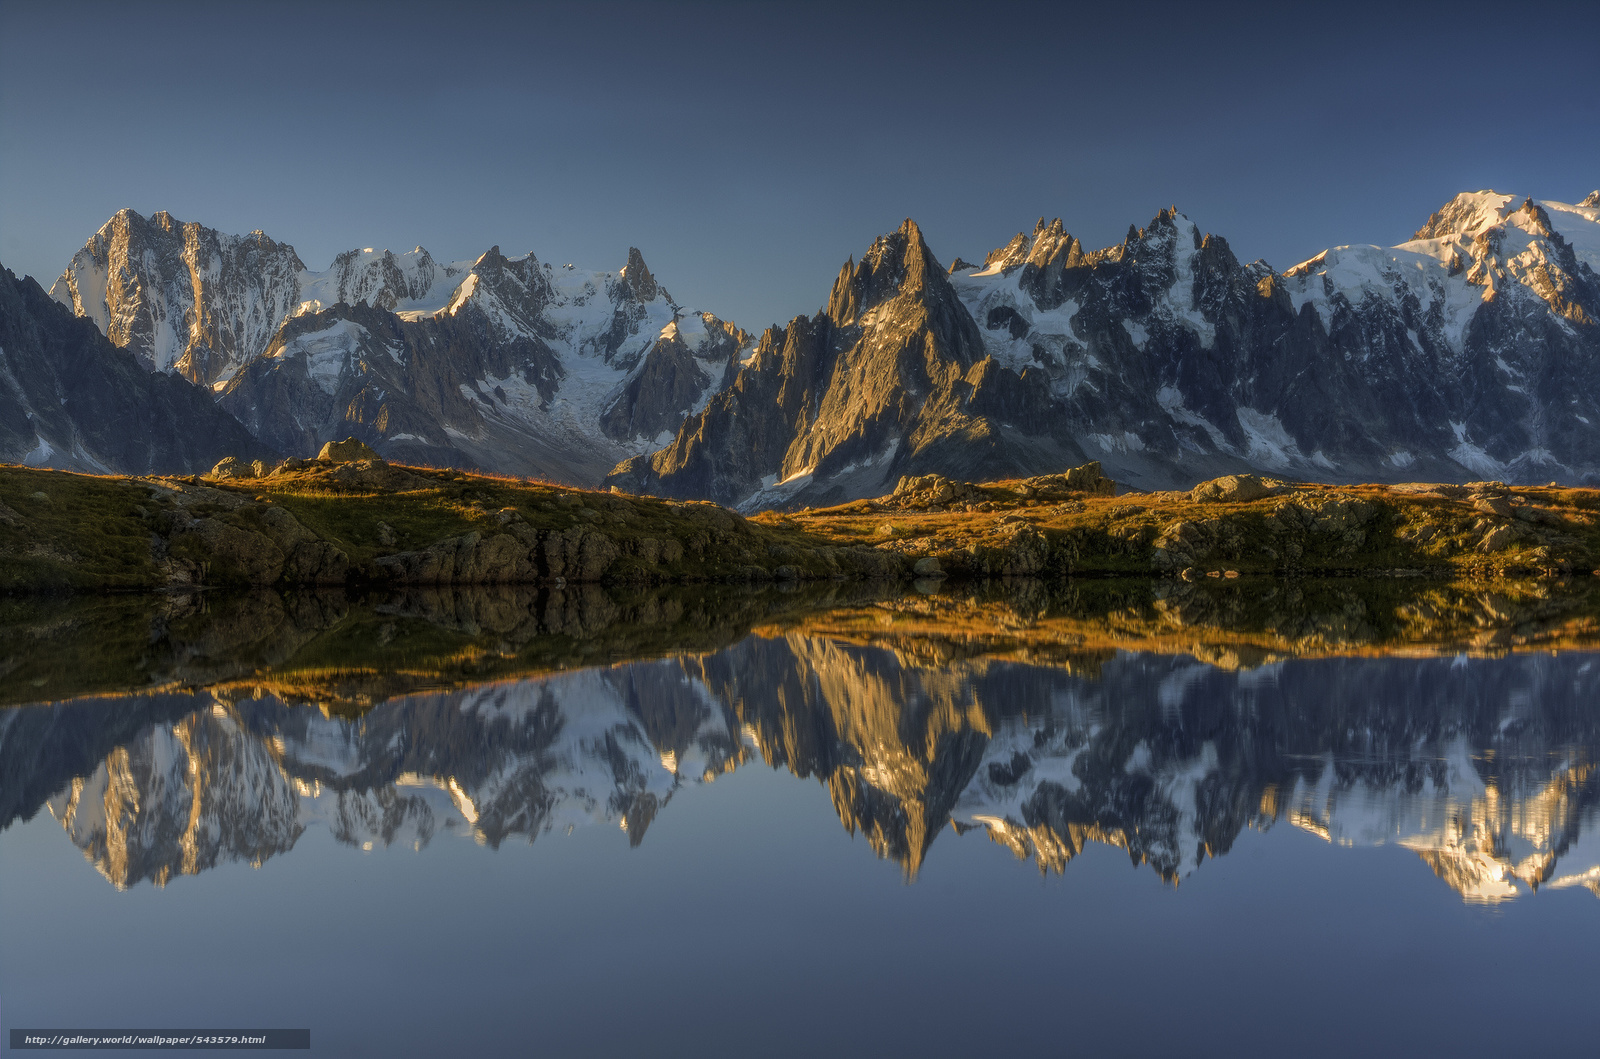 Download wallpaper Cheserey lake, French Alps, The French Alps, lake free desktop wallpaper in the resolution 2048x1355